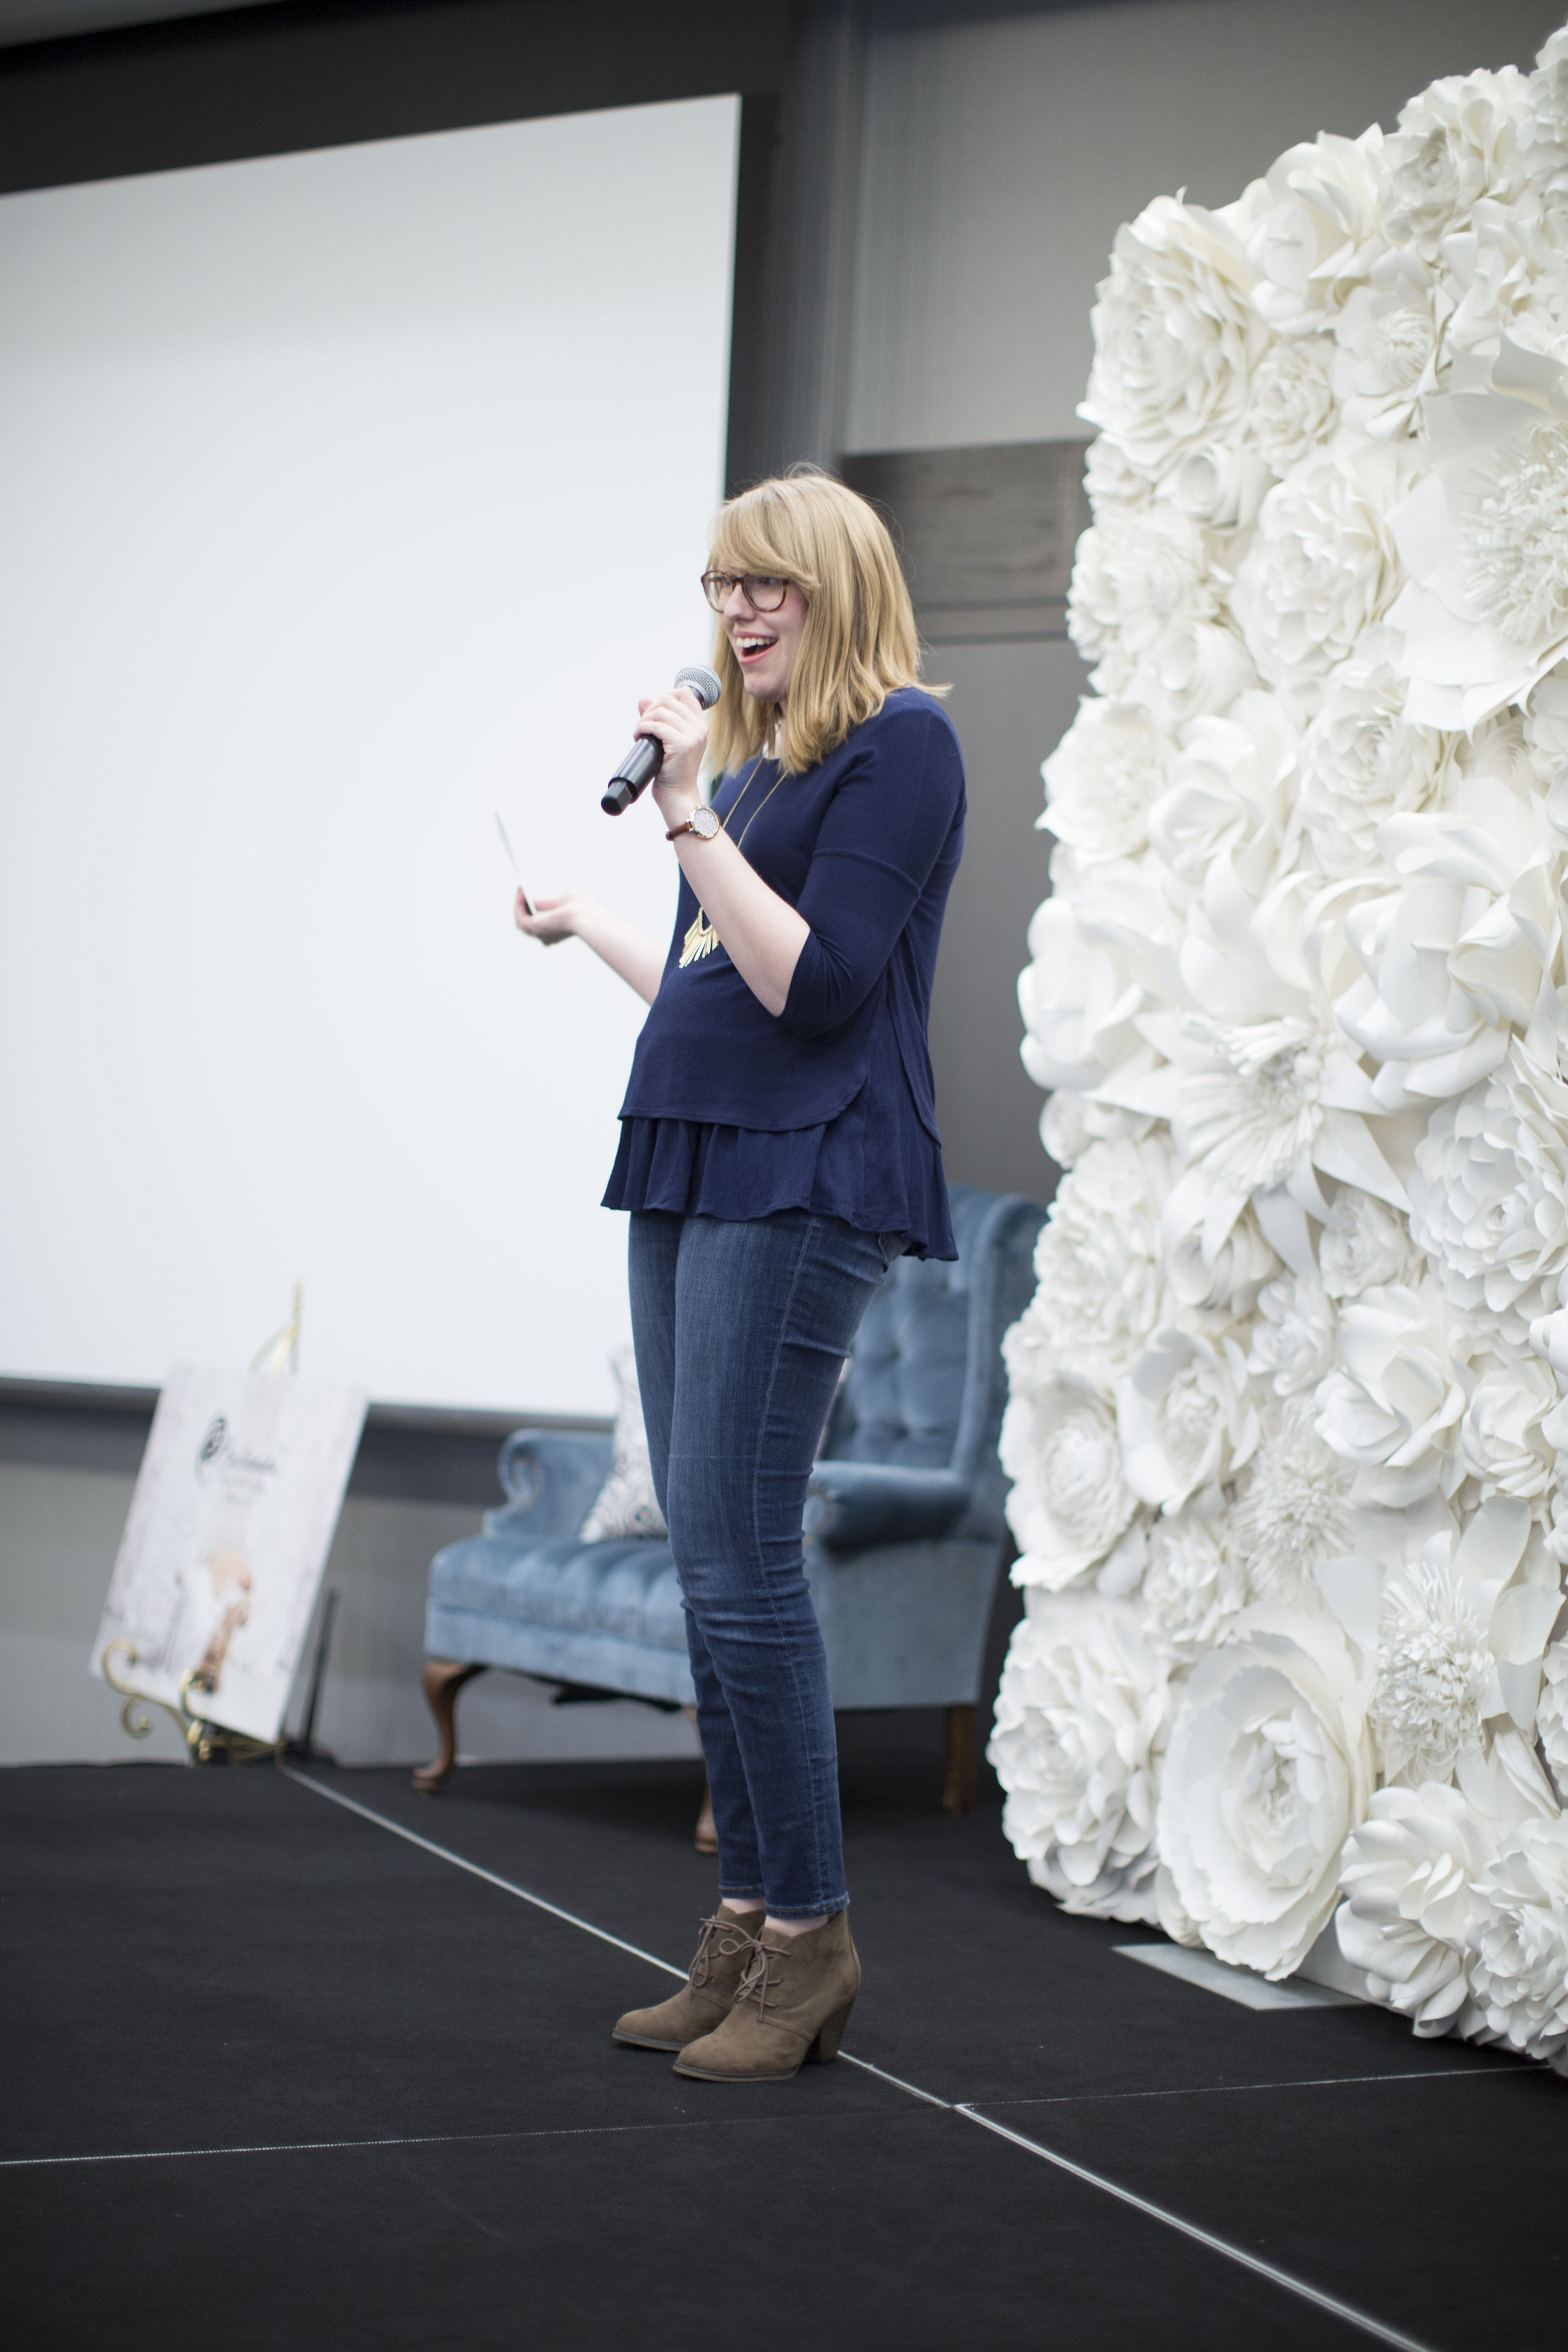 Emcee Nicole Seligman at Thrive Blog Conference - Cup of Charisma / Thrive Blog Conference changed the way I view blogging. Here are the 7 game-changing things I learned.